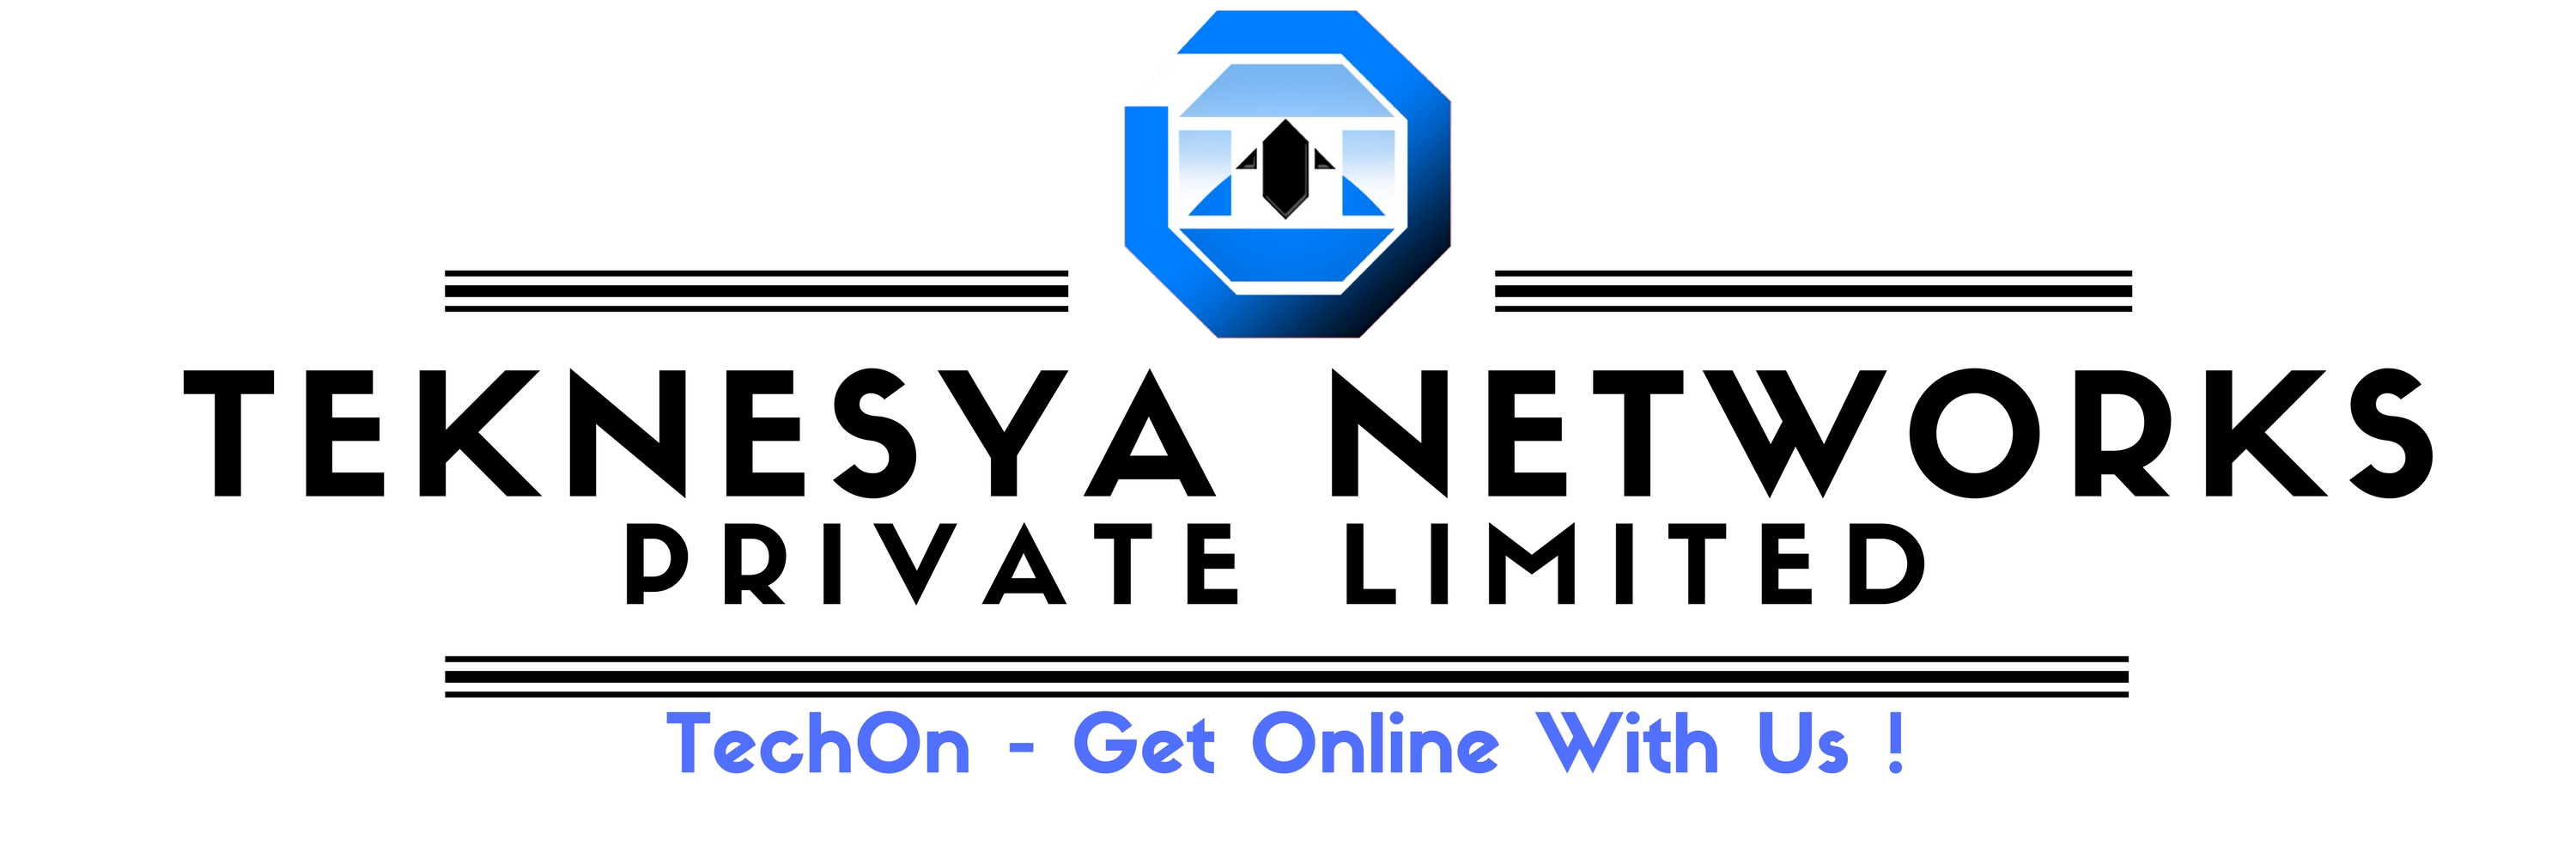 Teknesya Networks Private Limited